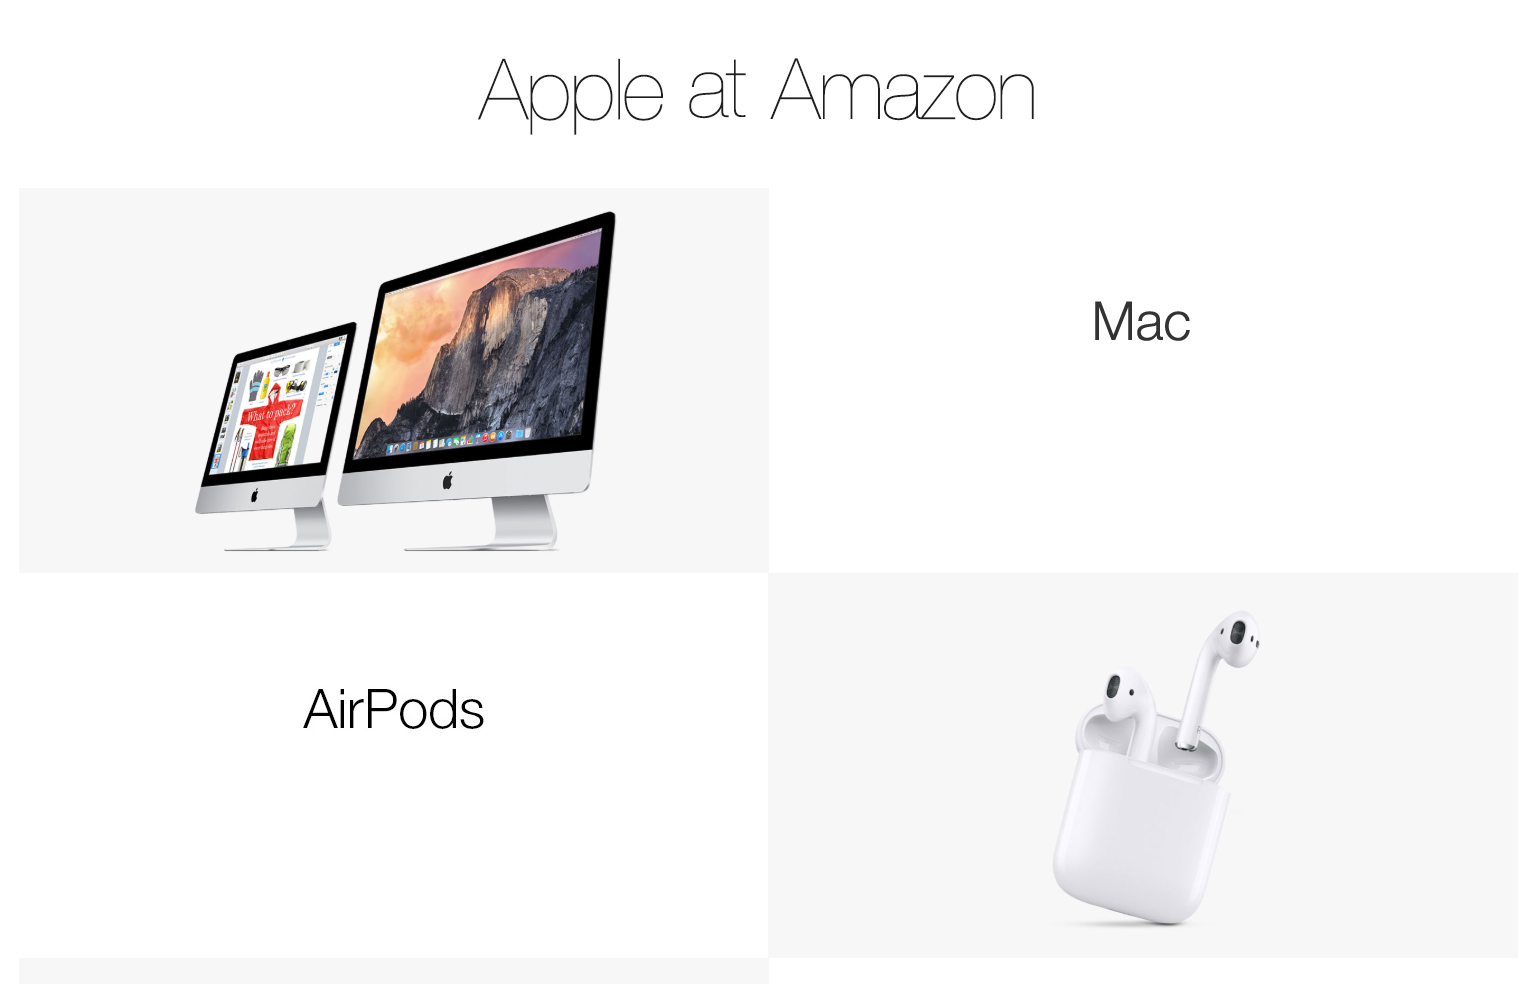 Apple Authorized Reseller Store Goes Live on Amazon Ahead of Black Friday and Cyber Monday